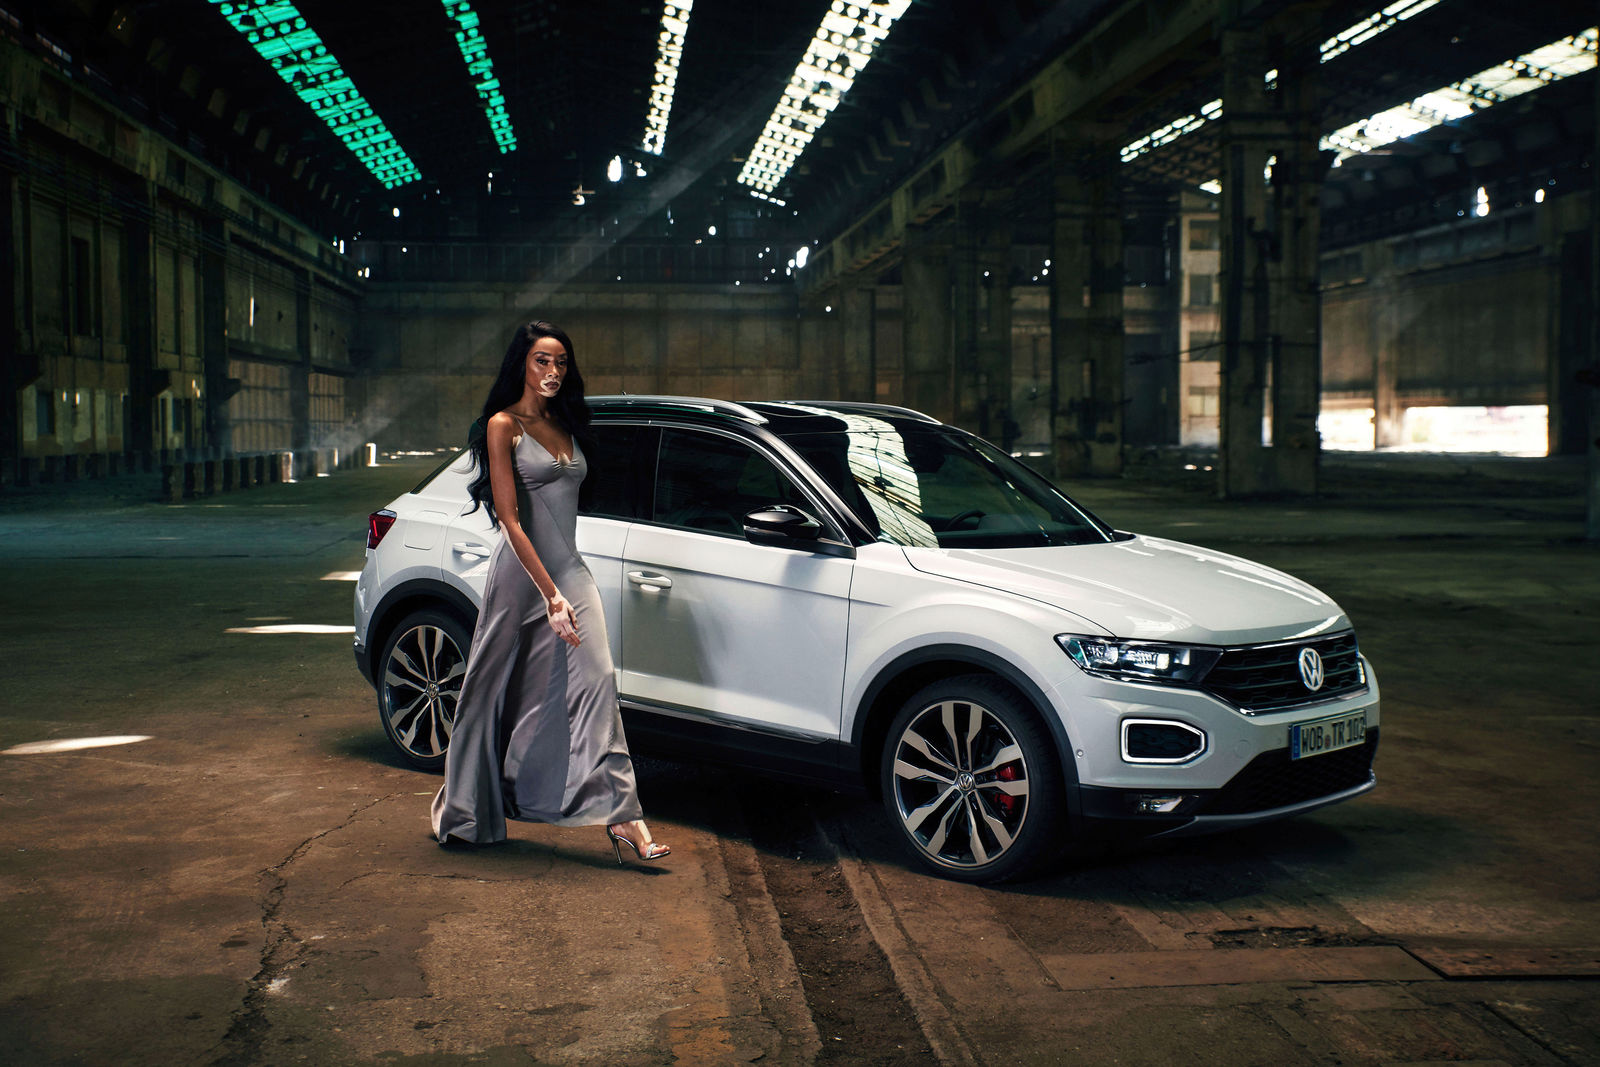 Distinctive and confident – Volkswagen launches digital campaign with T-Roc and Winnie Harlow